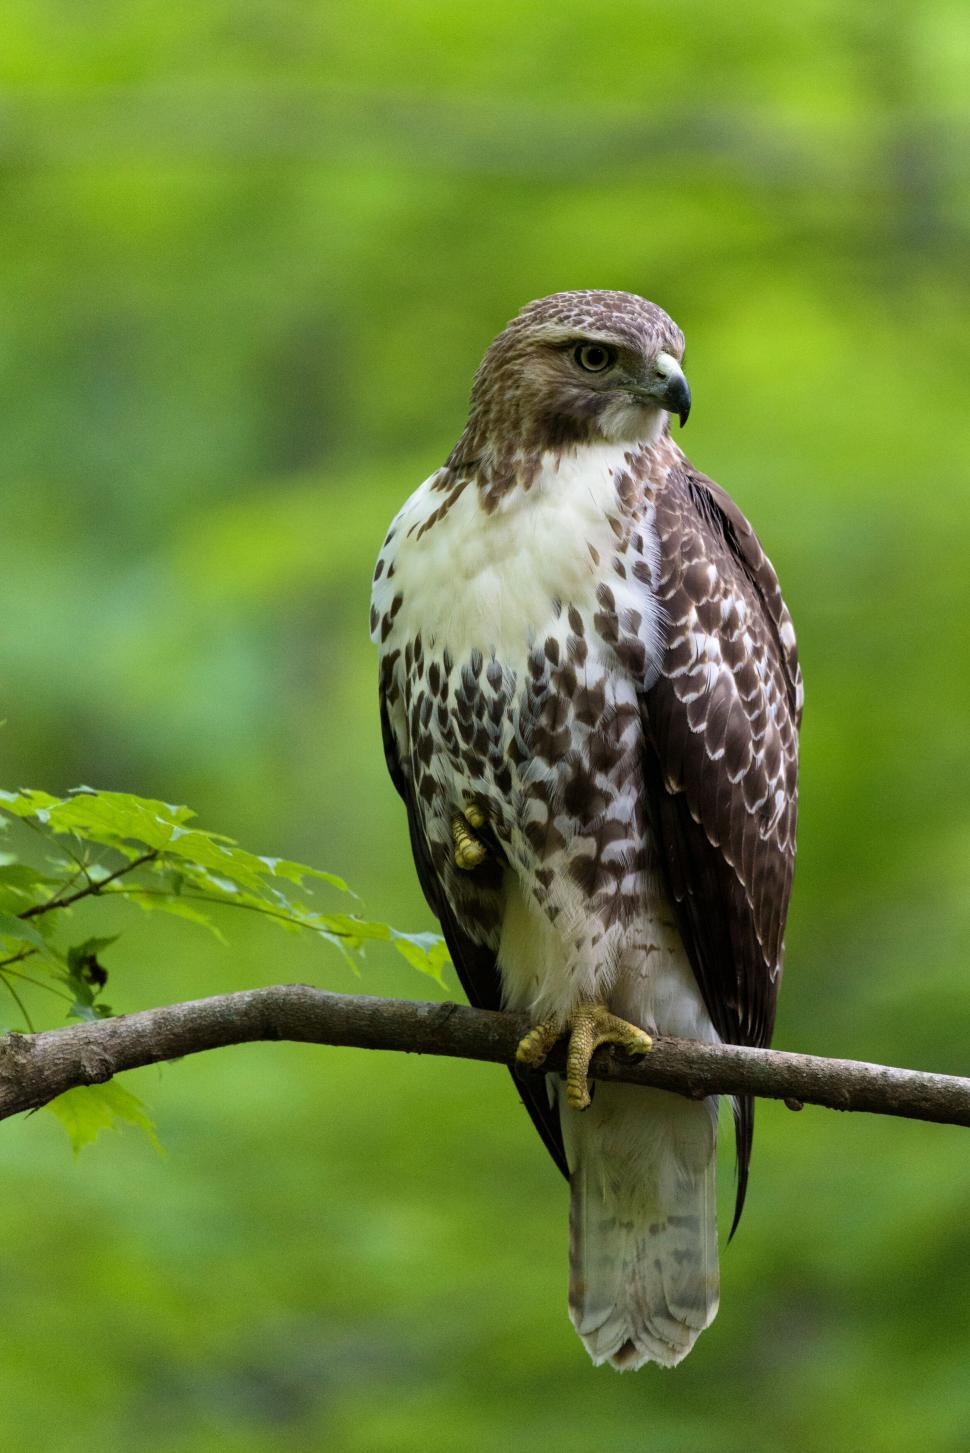 Free Image of Hawk perched on a branch with blurred green background 